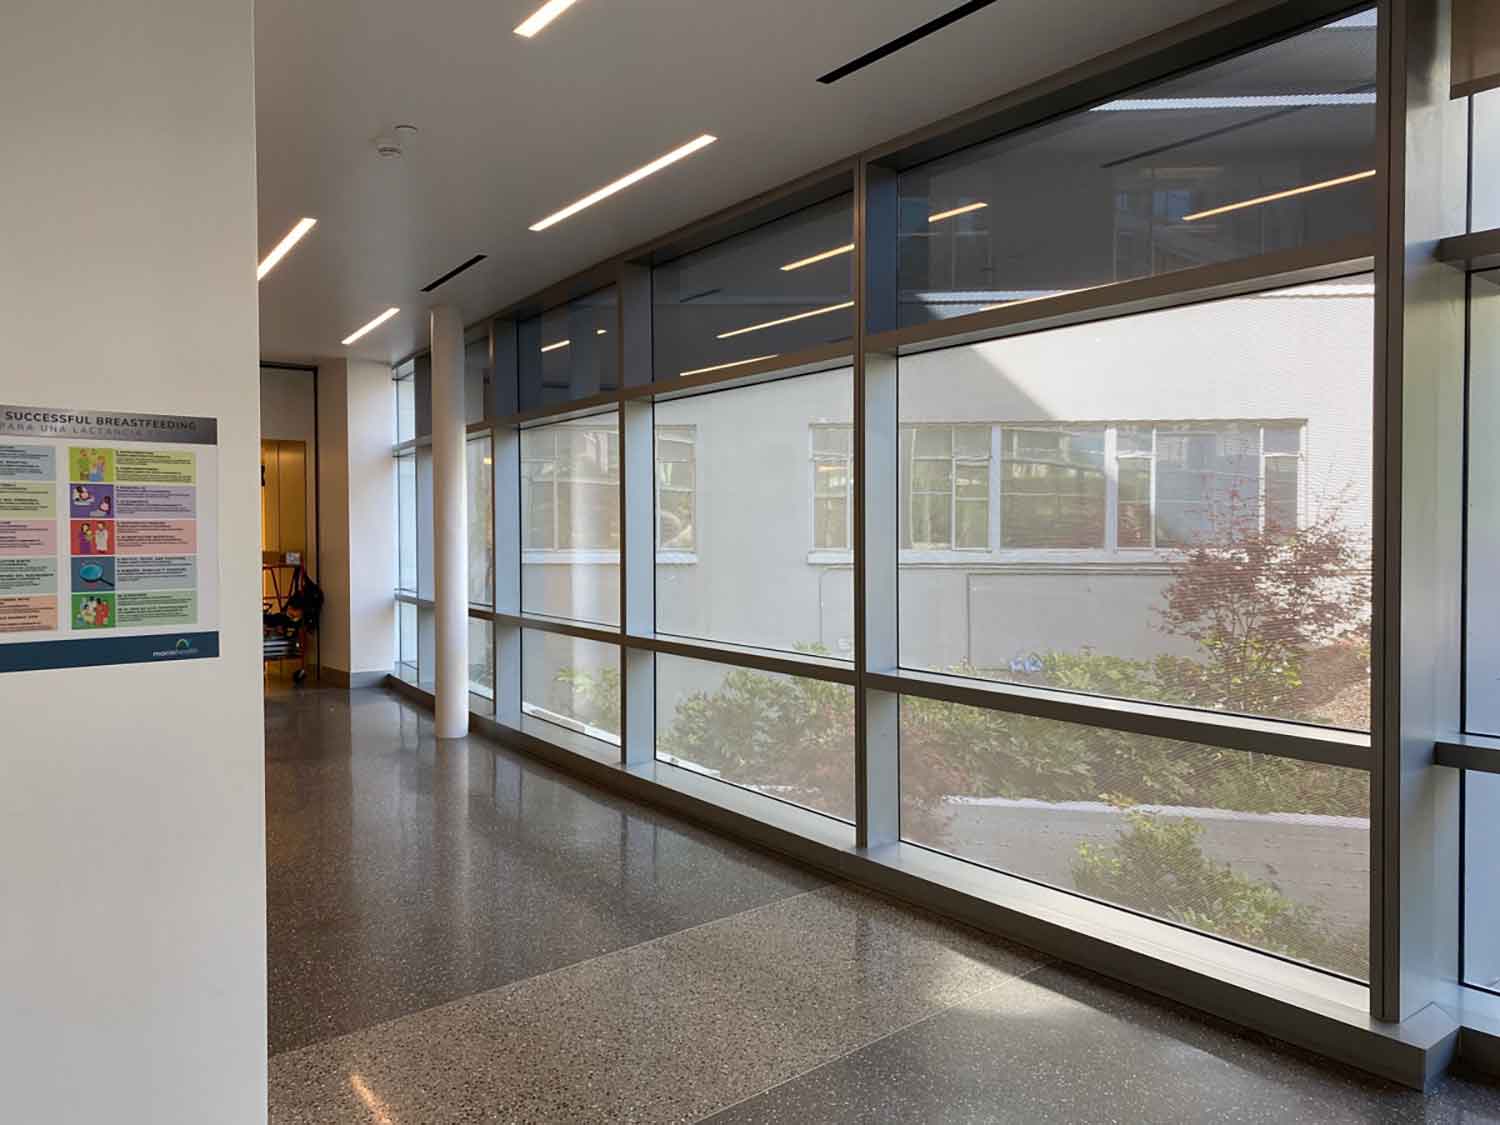 Create safer hospitals with 3M Window Tint from ClimatePro.